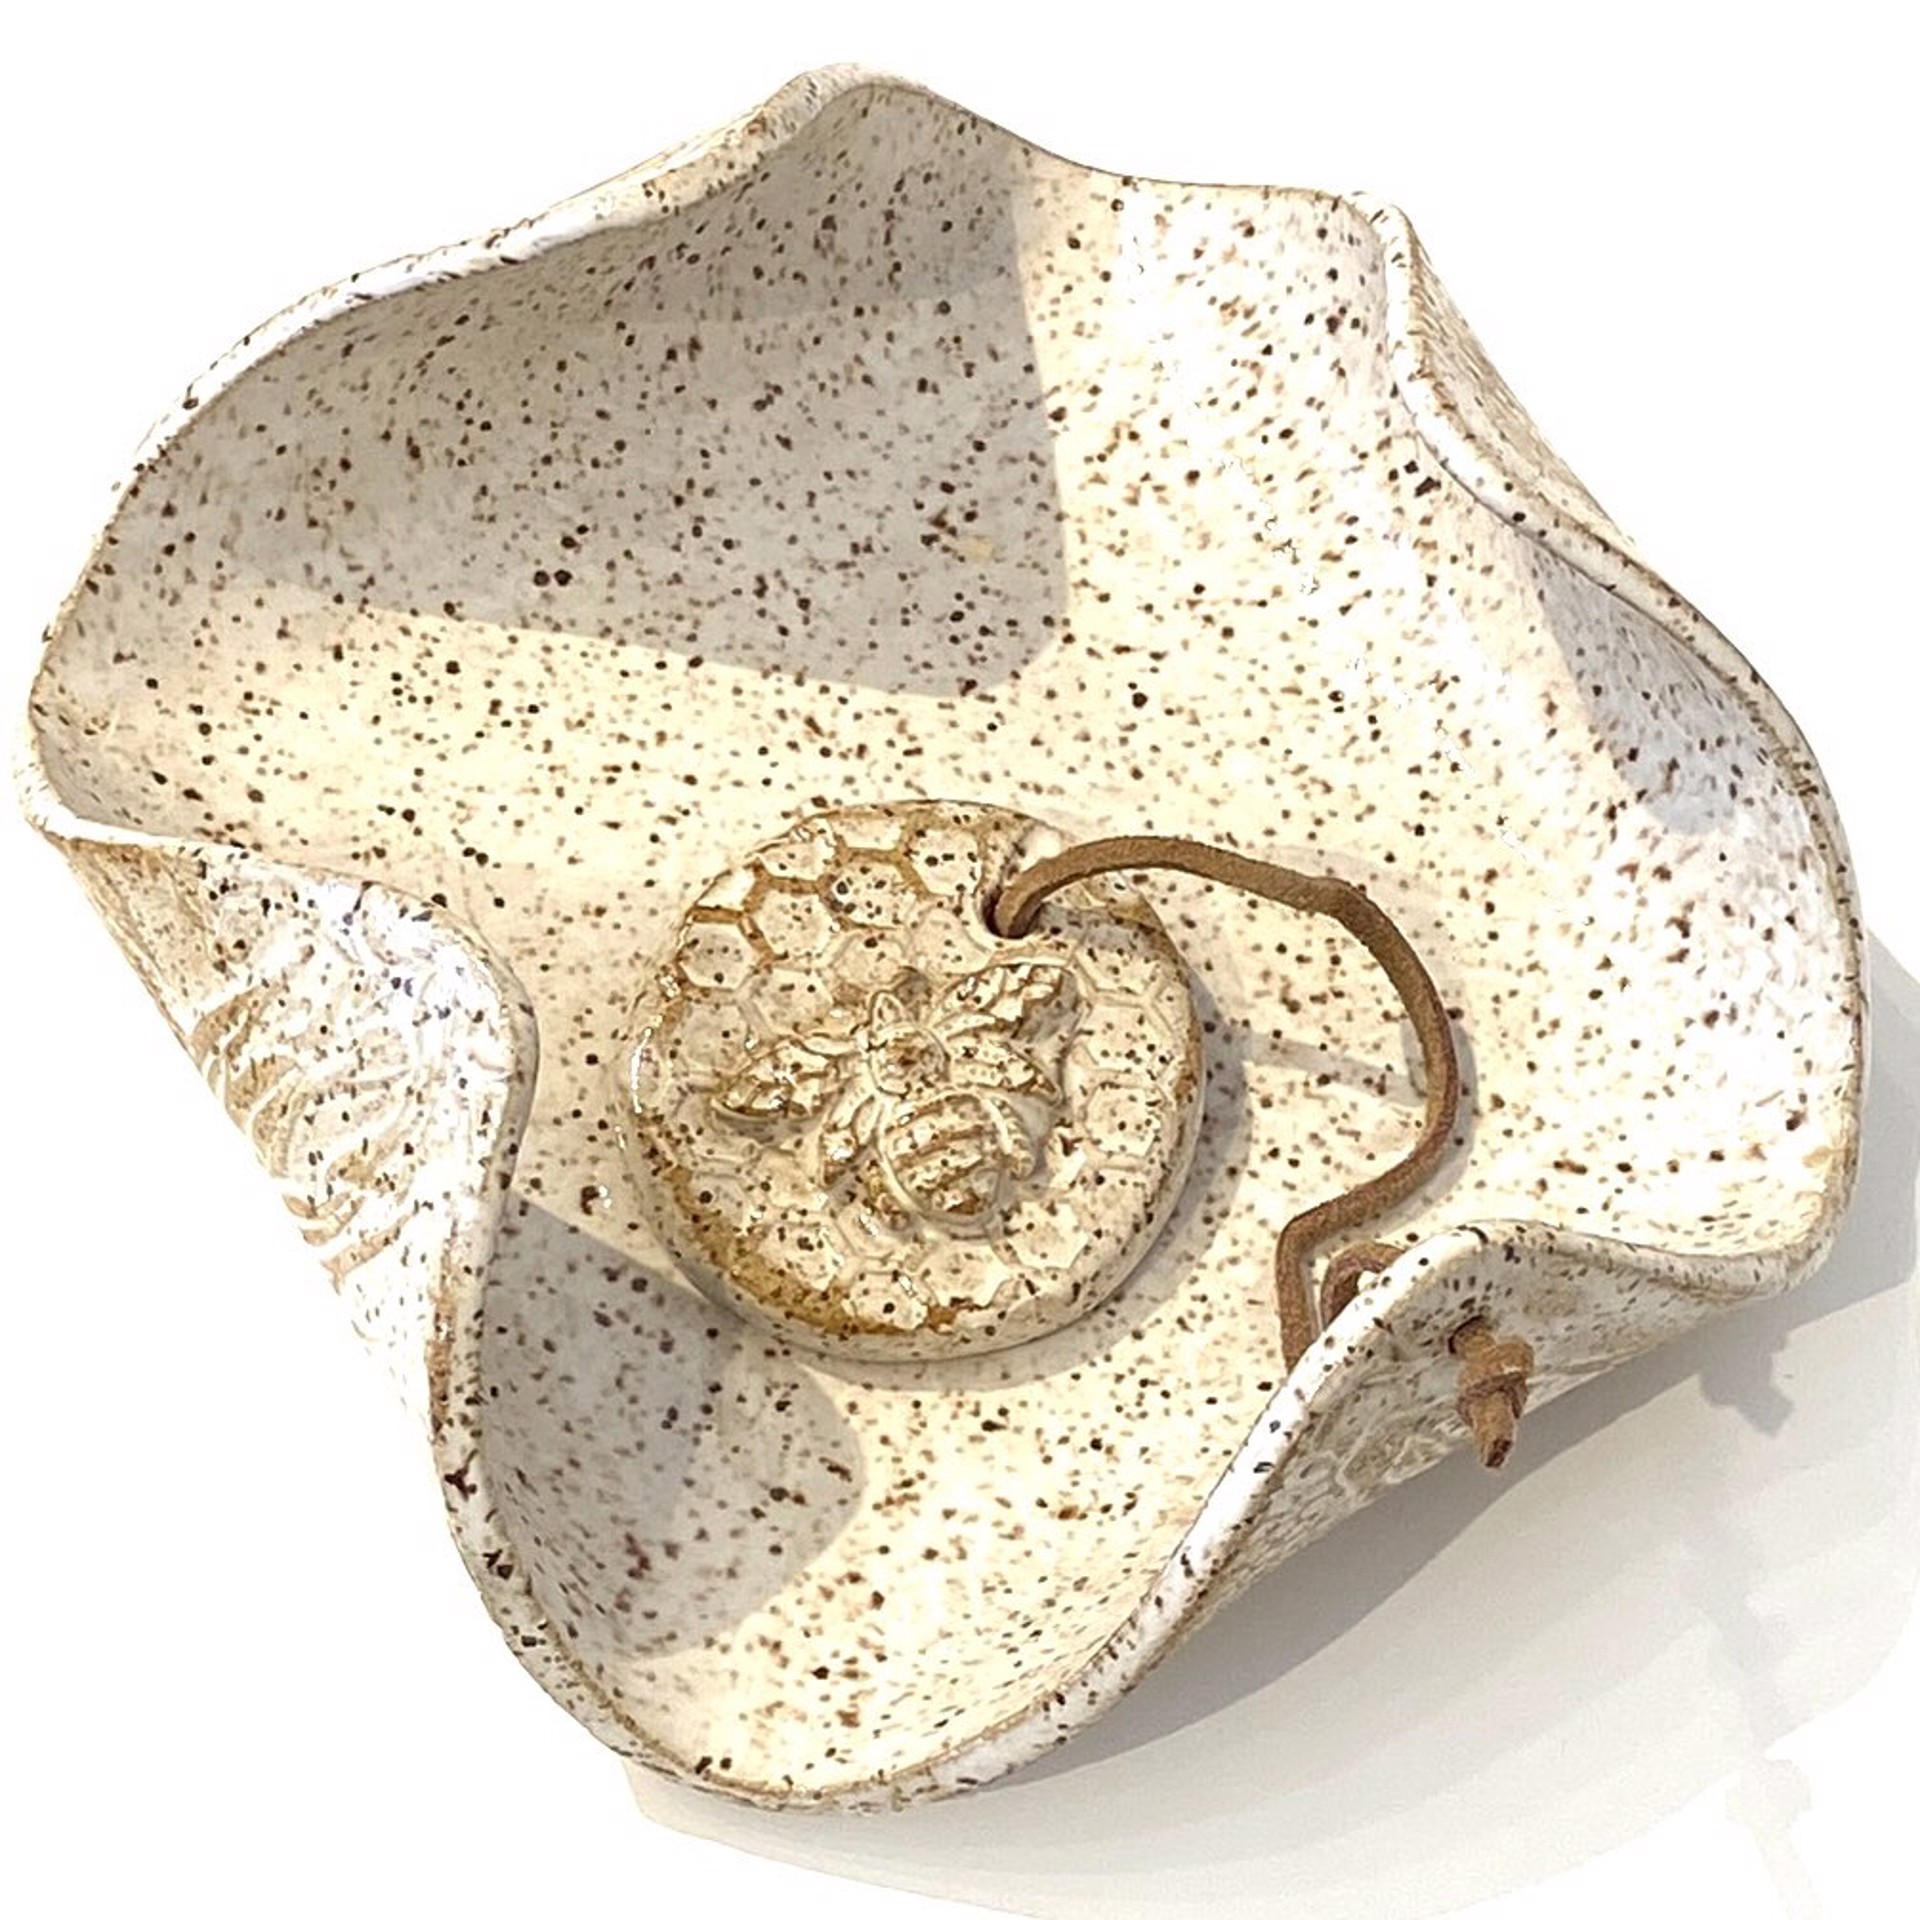 BB23-3 Napkin Holder with Bee and Honeycomb Weight by Barbara Bergwerf, ceramics